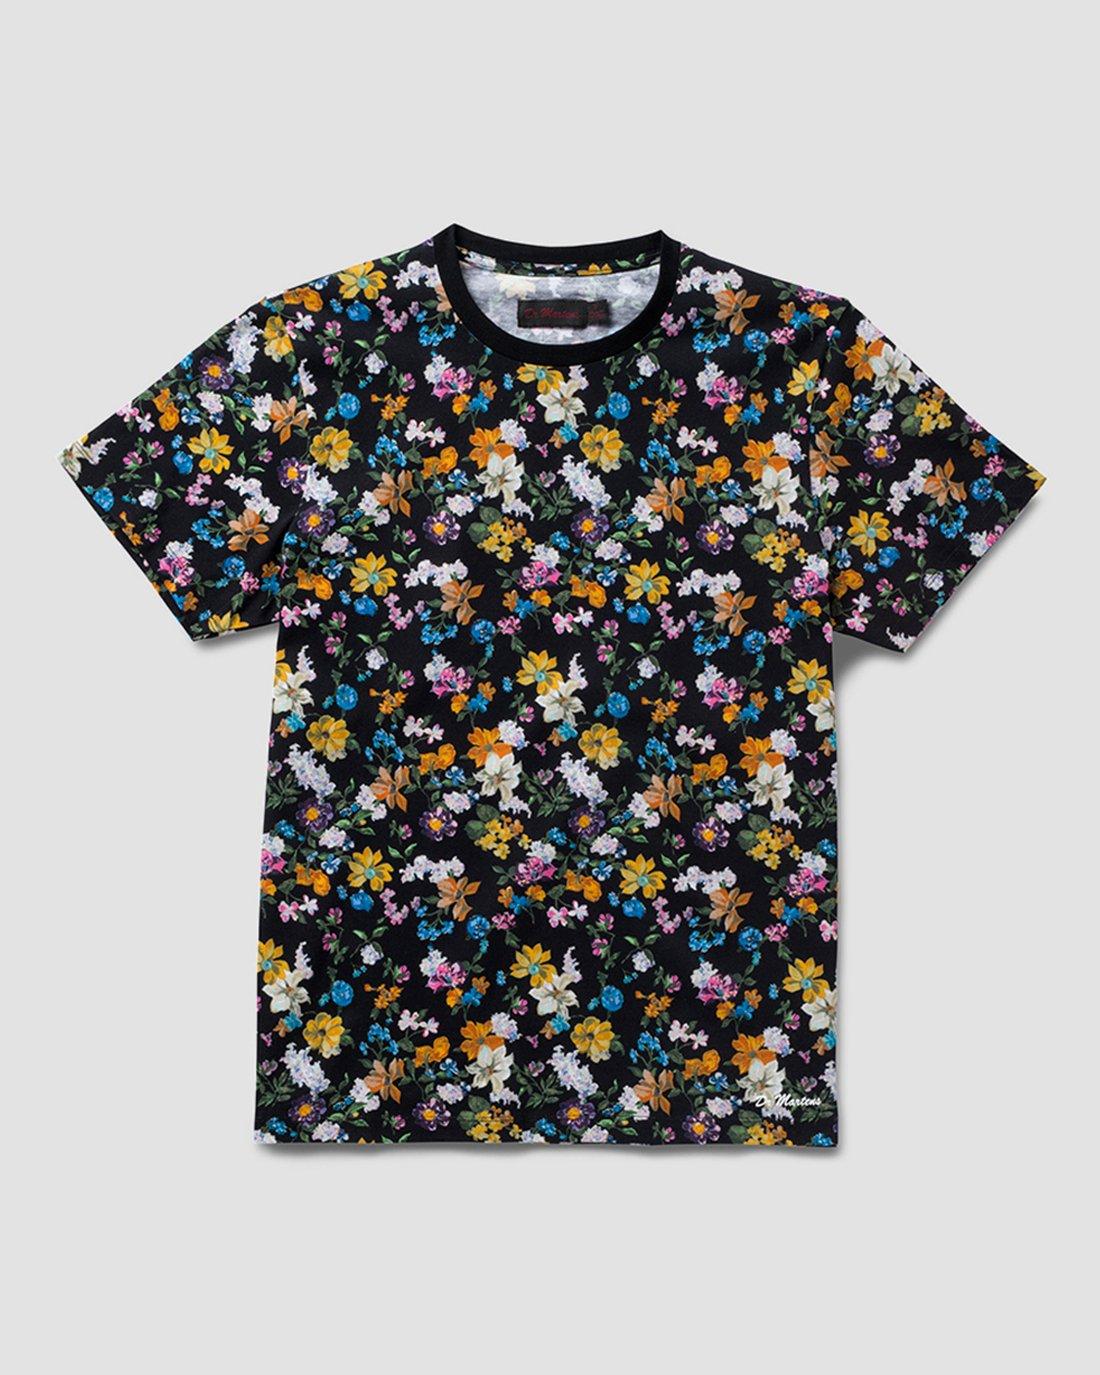 Darcy Floral Short Sleeve T-Shirt in Black